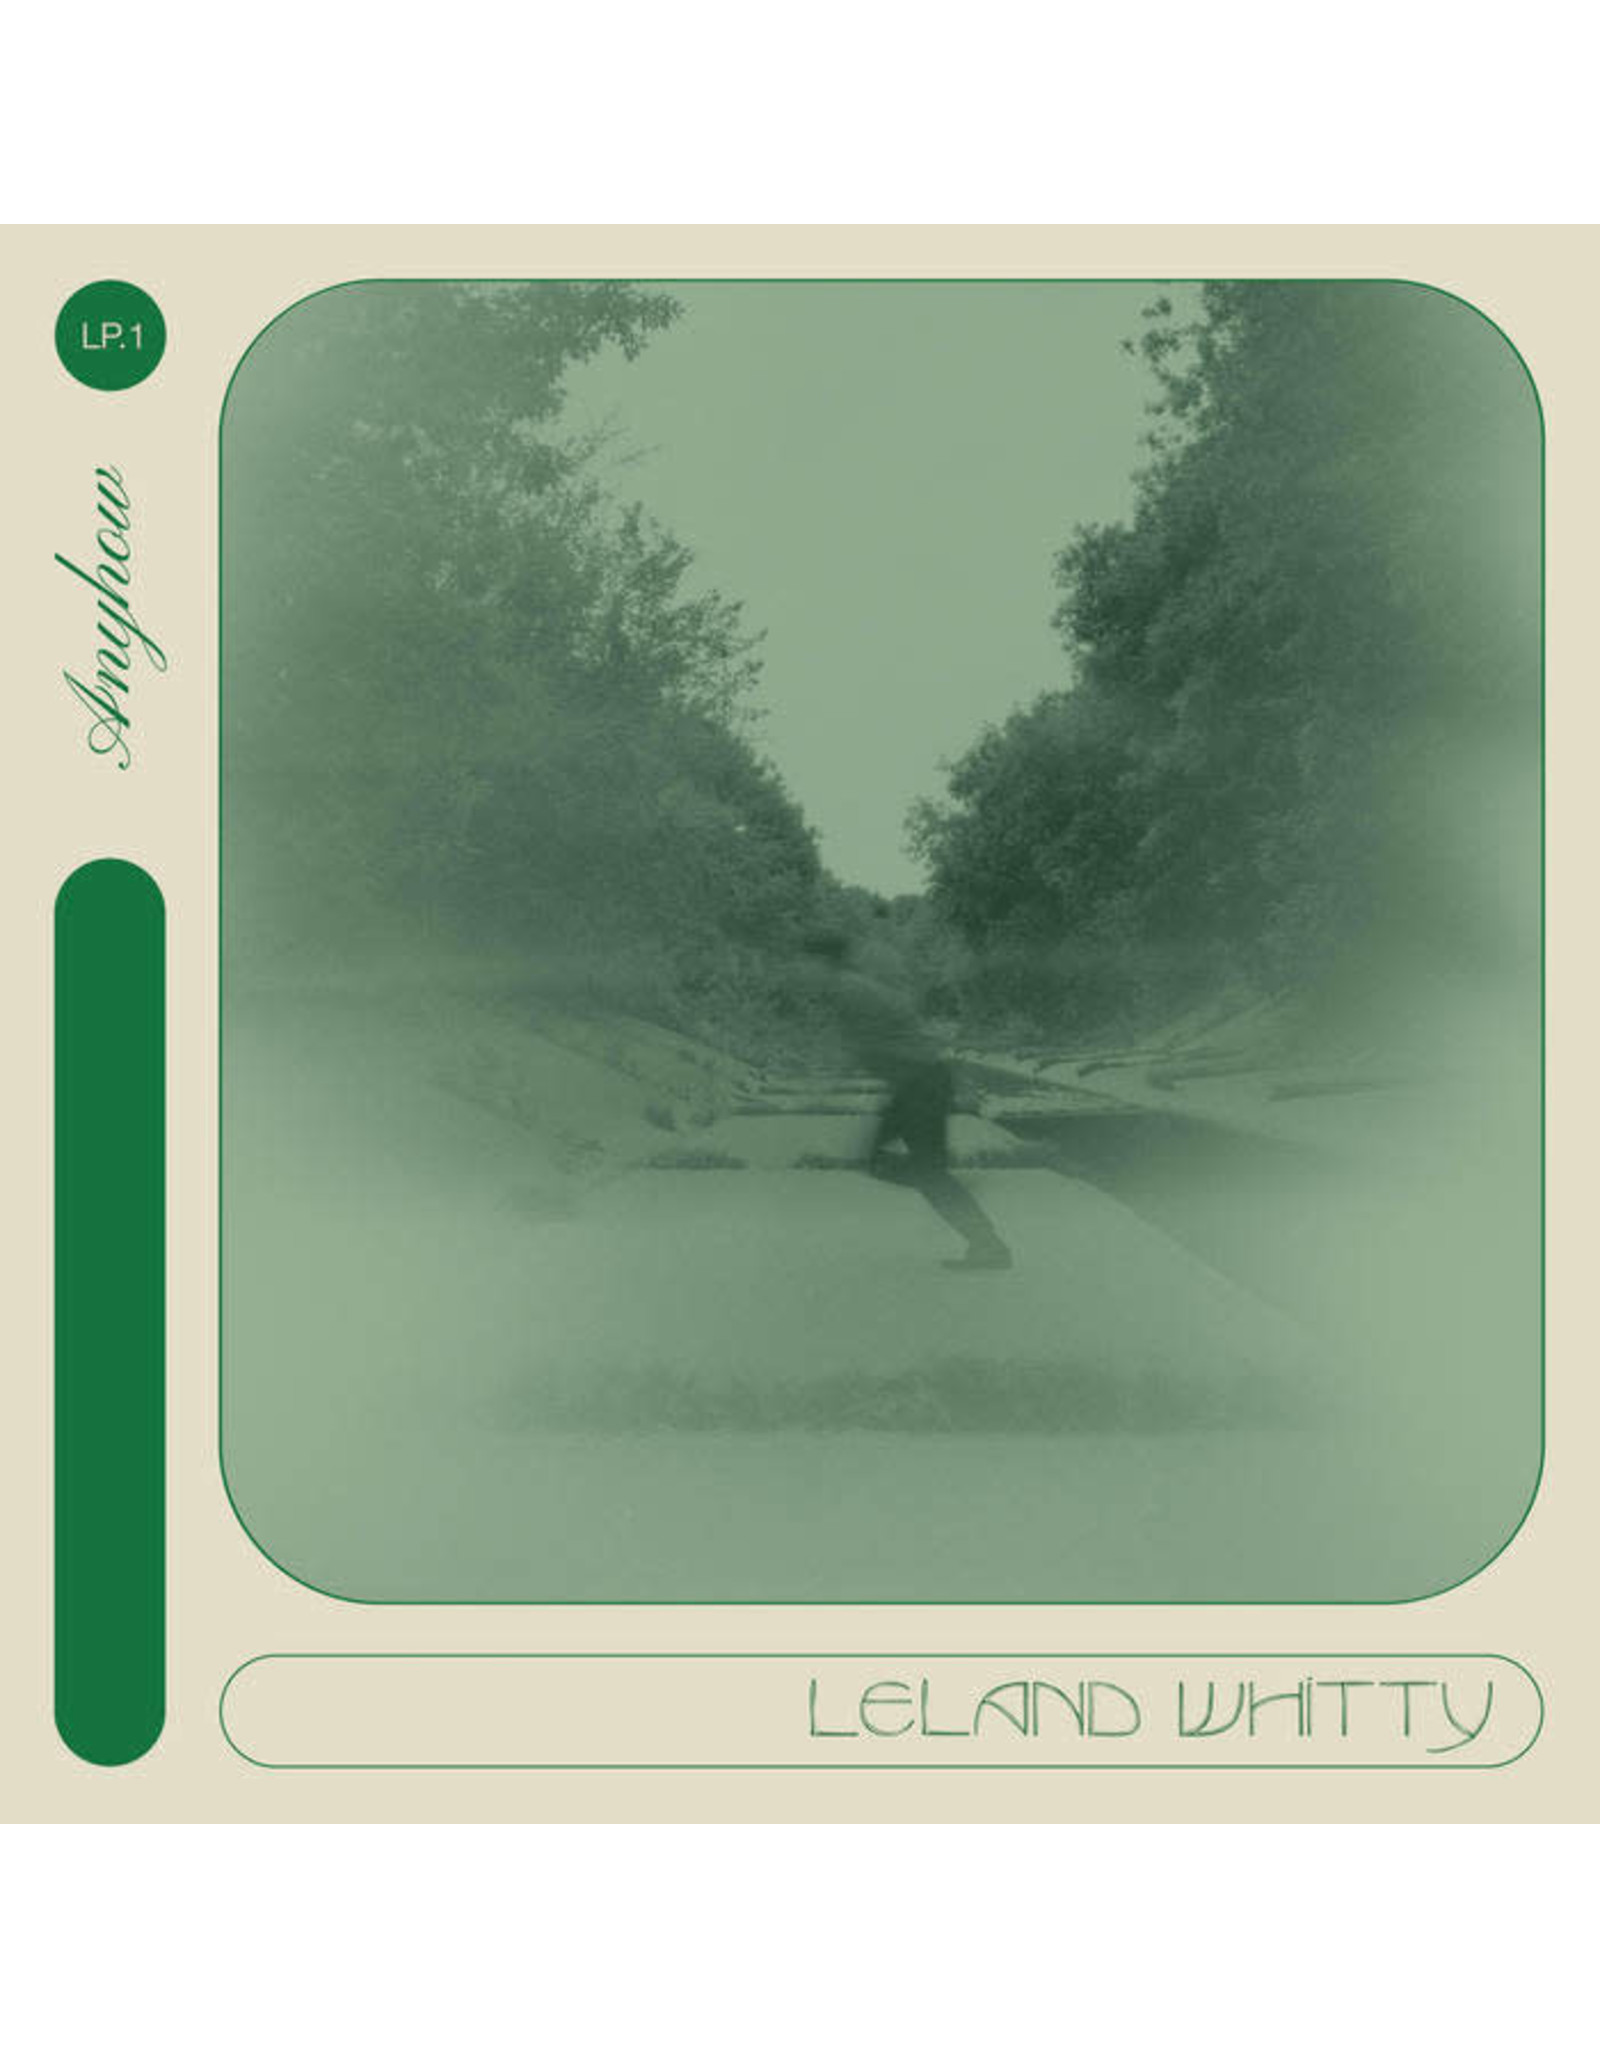 Innovative Leisure Whitty, Leland: Anyhow LP